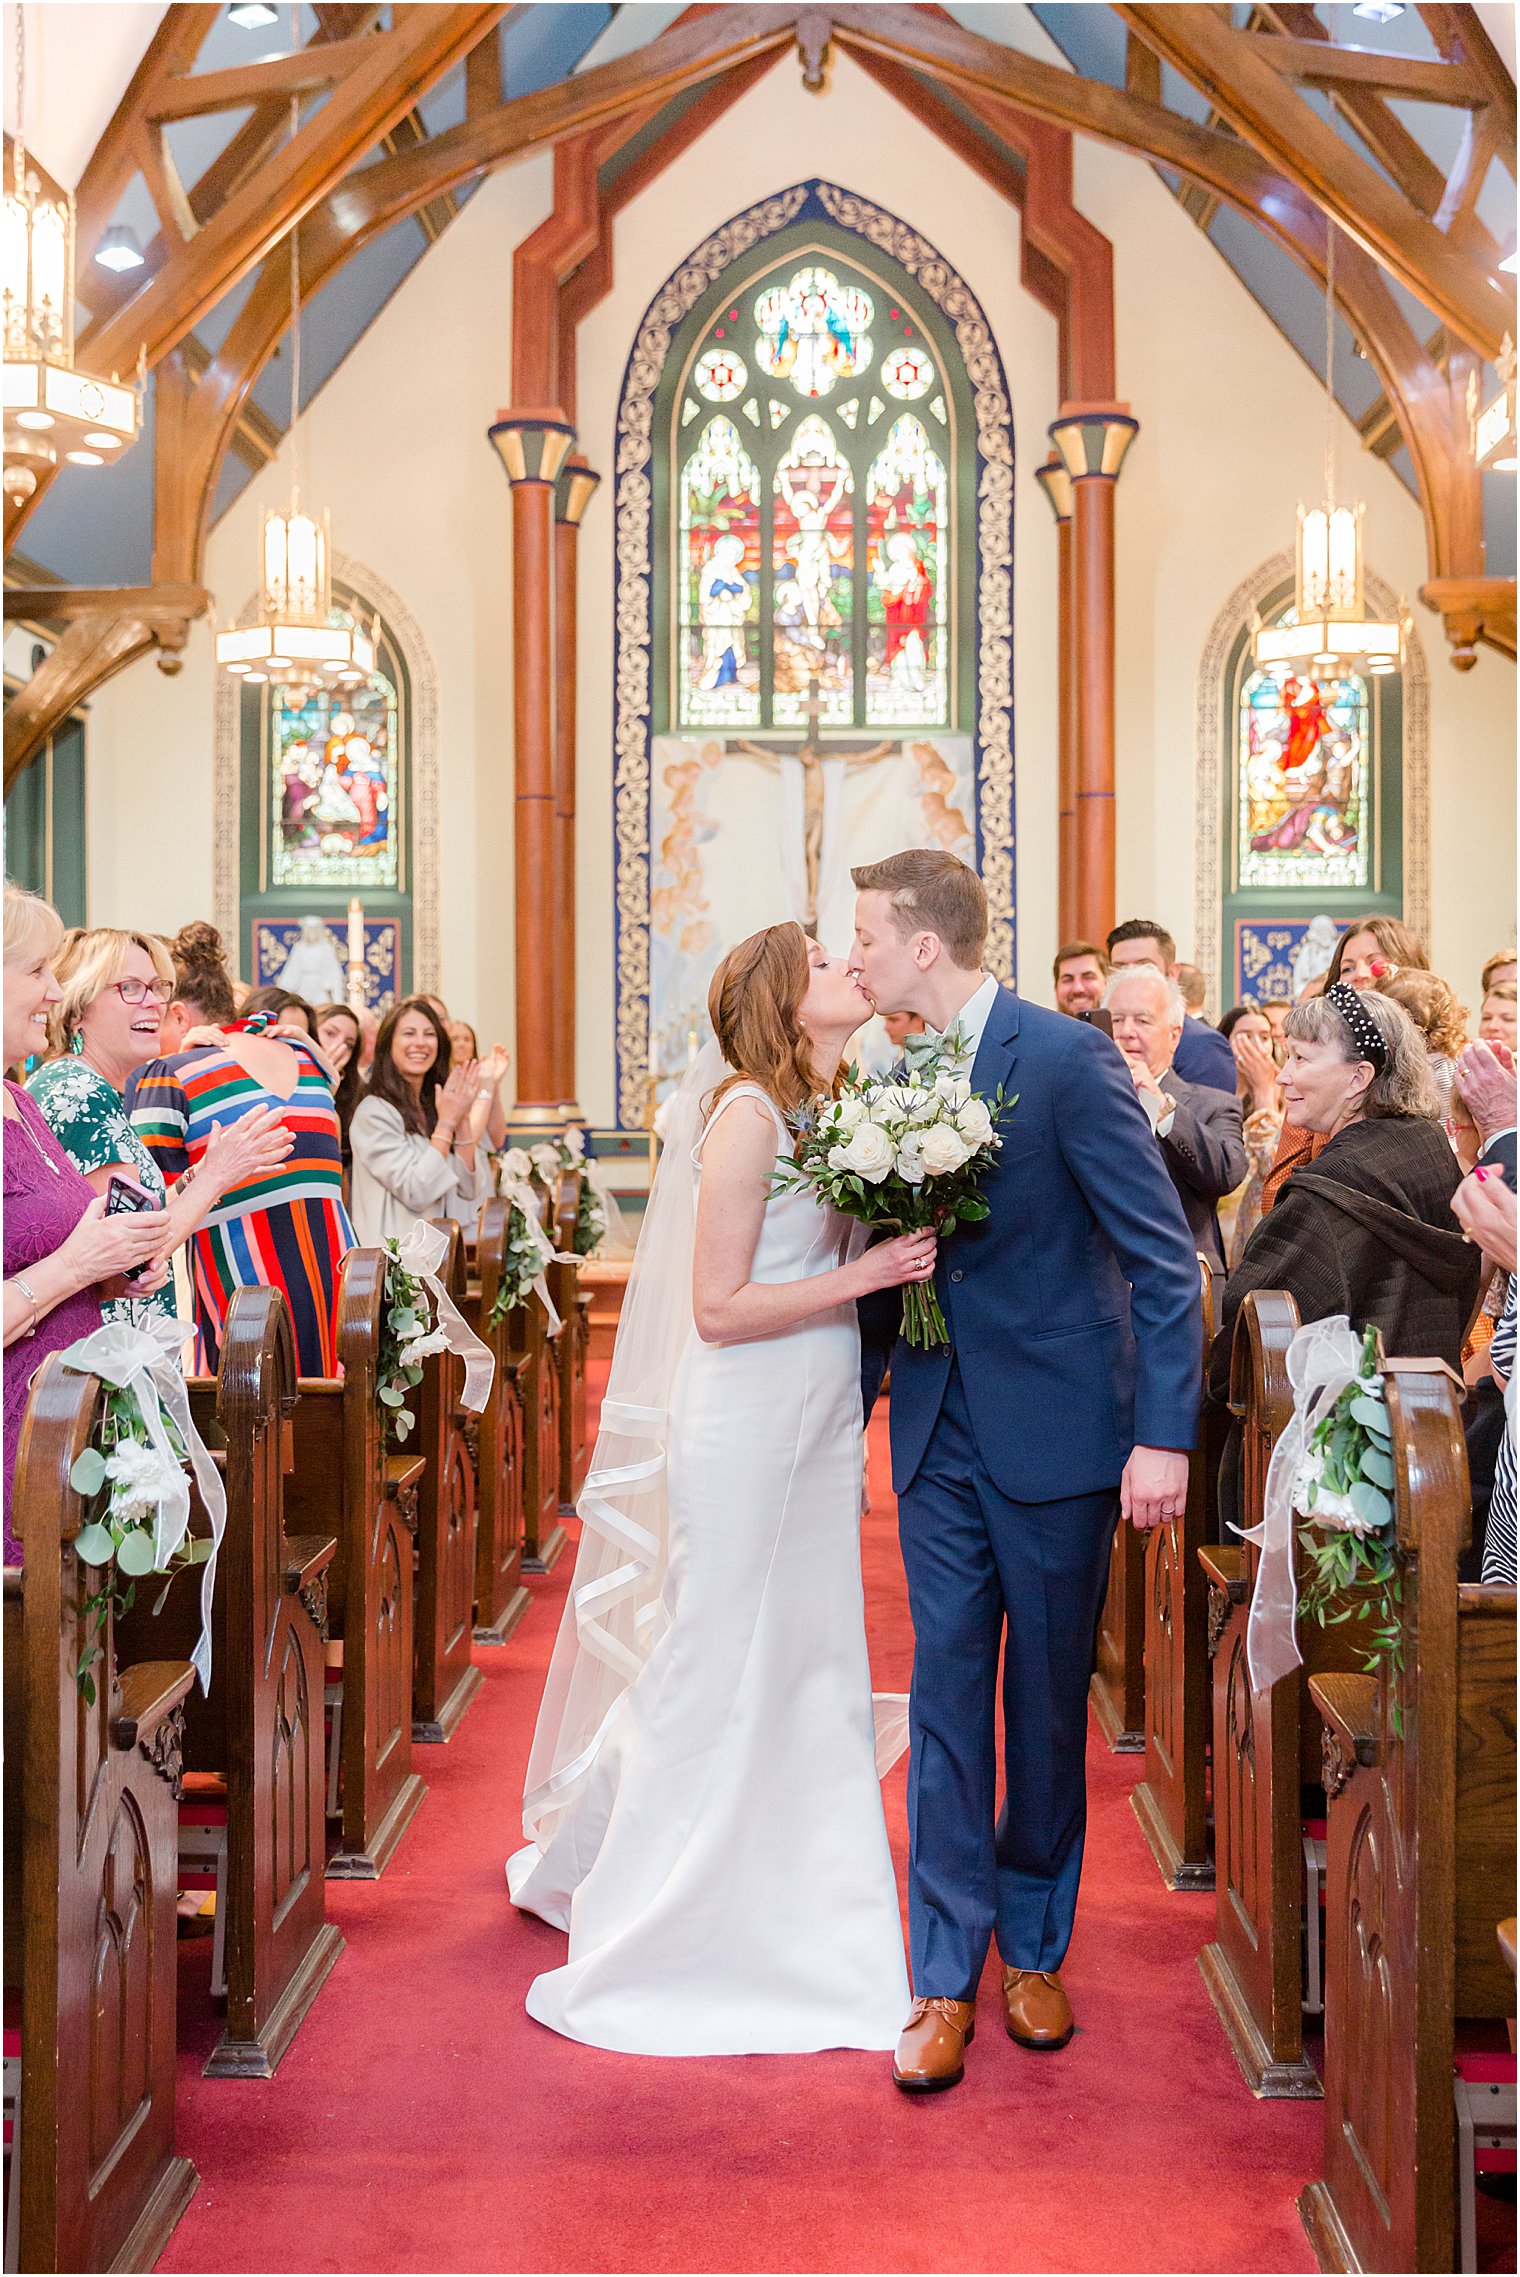 newlyweds kiss in aisle after traditional church ceremony at Avon-by-the-Sea